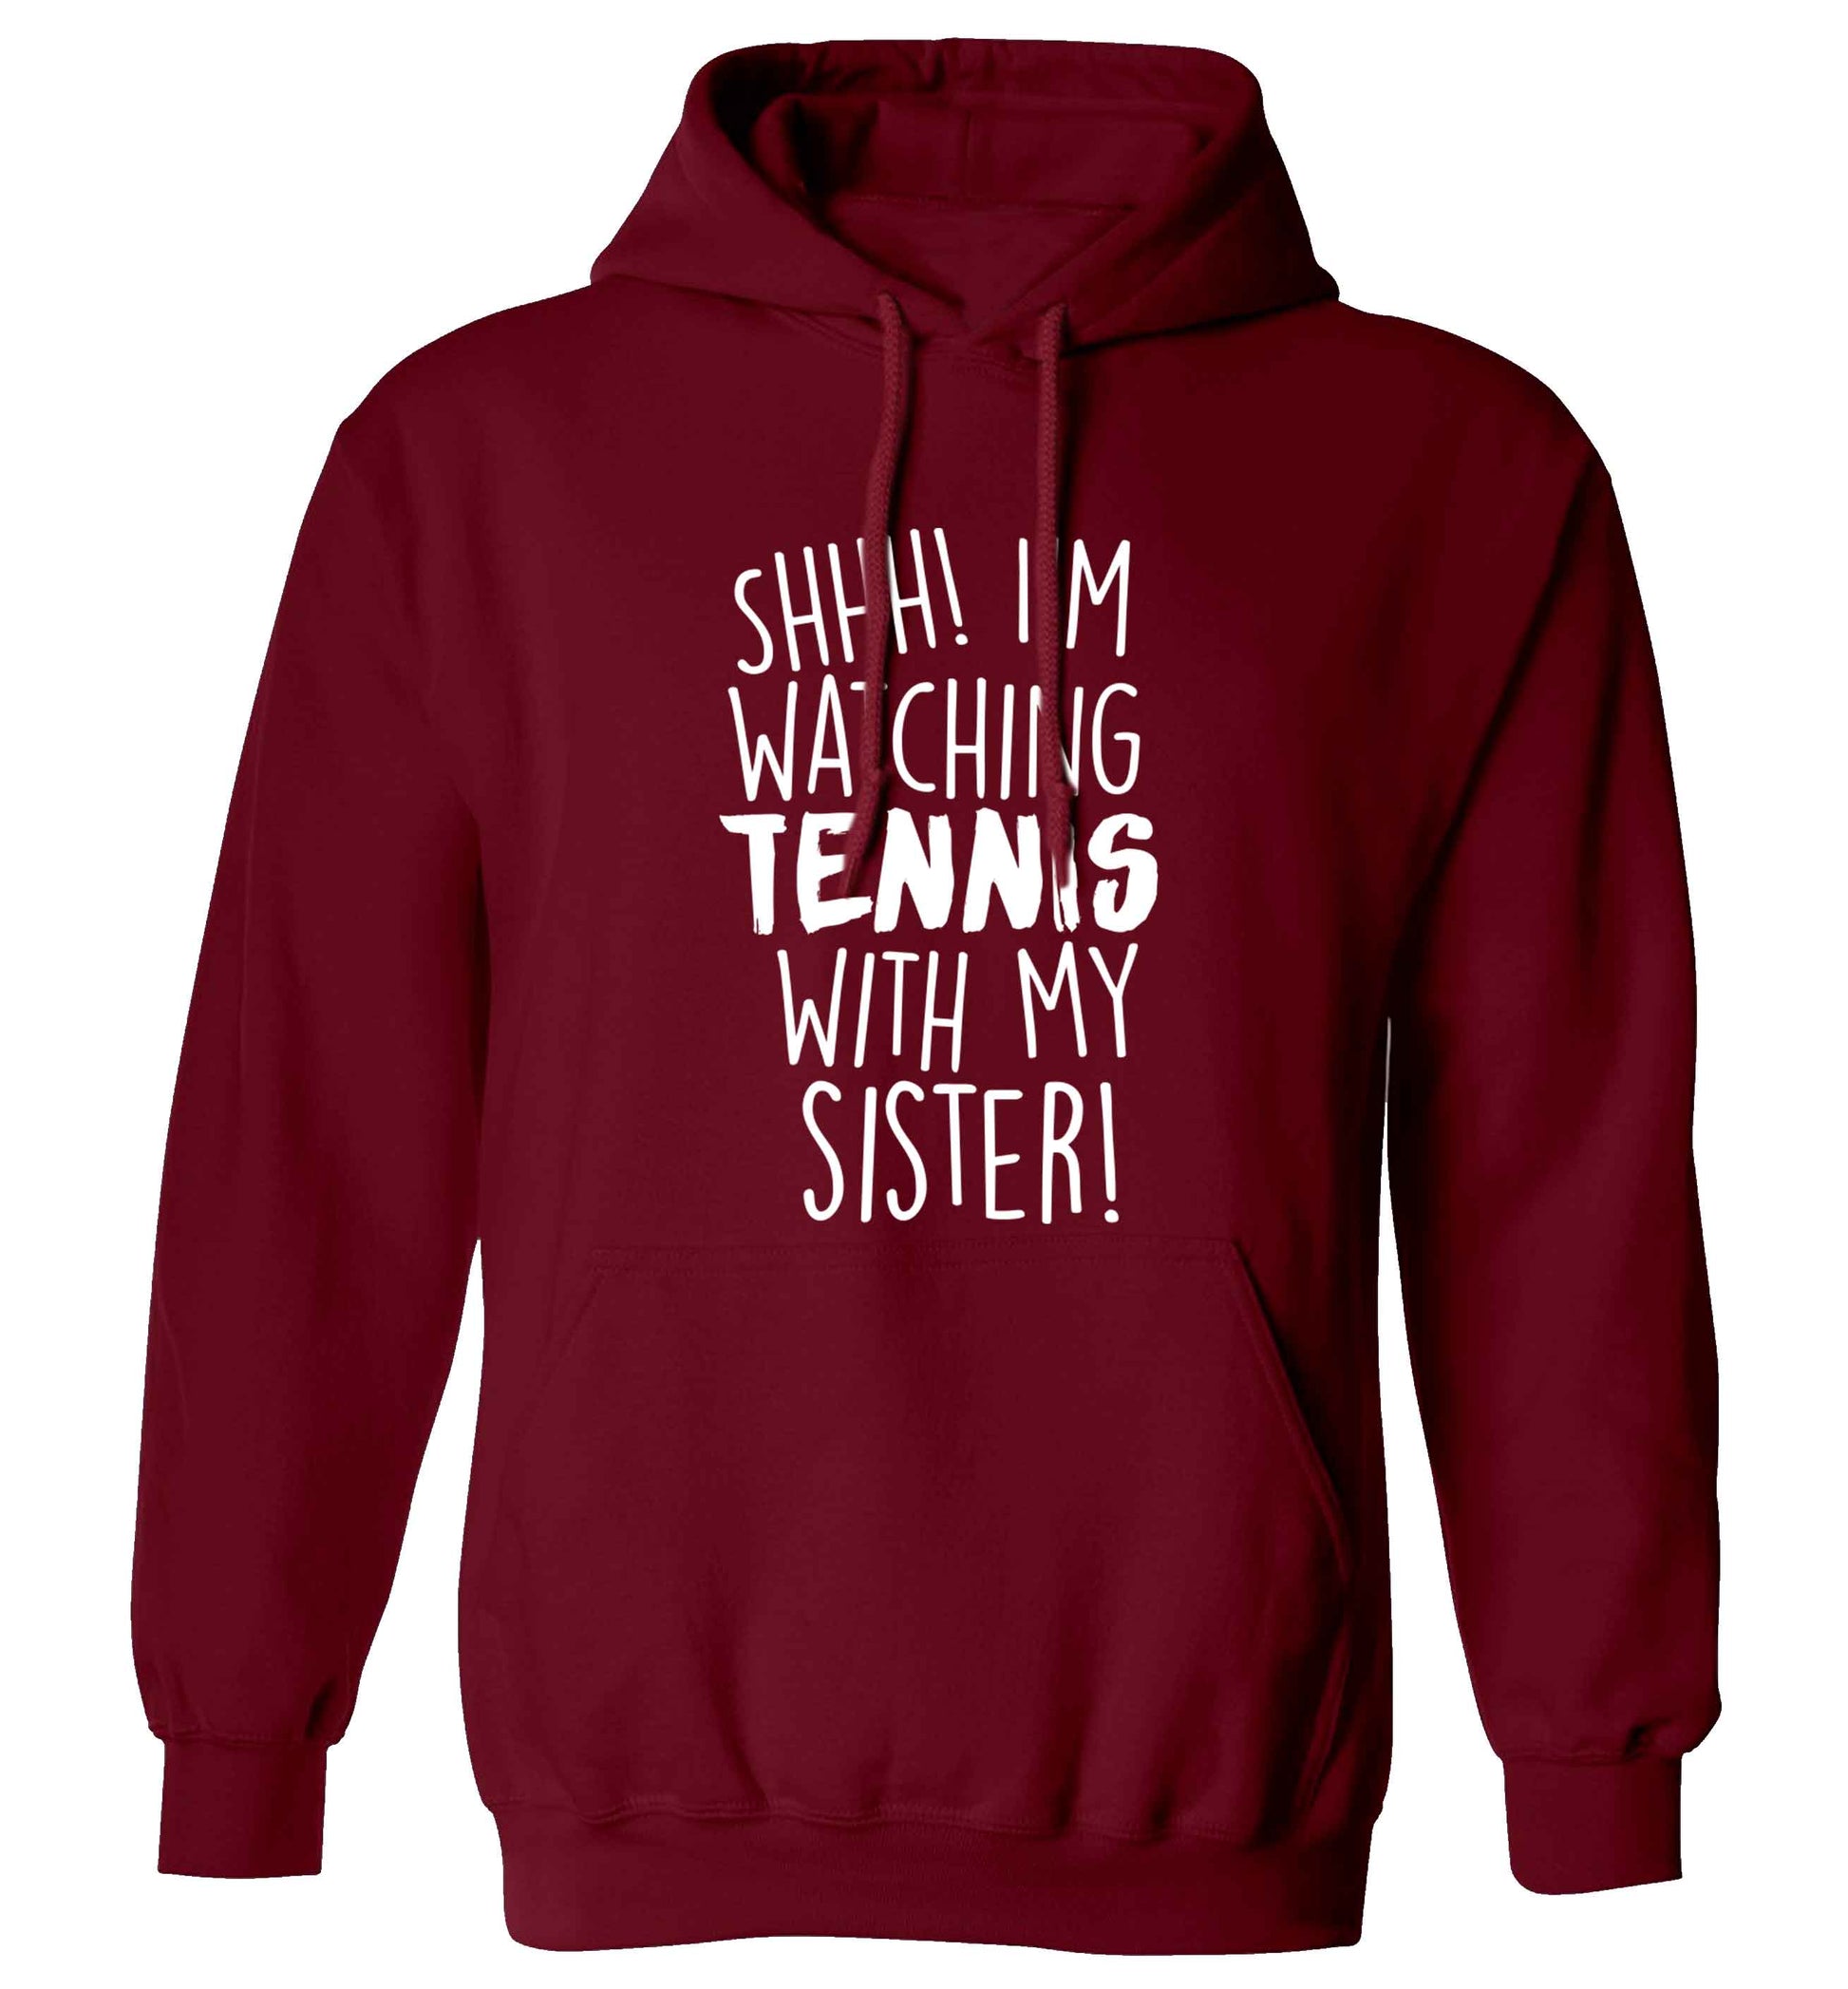 Shh! I'm watching tennis with my sister! adults unisex maroon hoodie 2XL